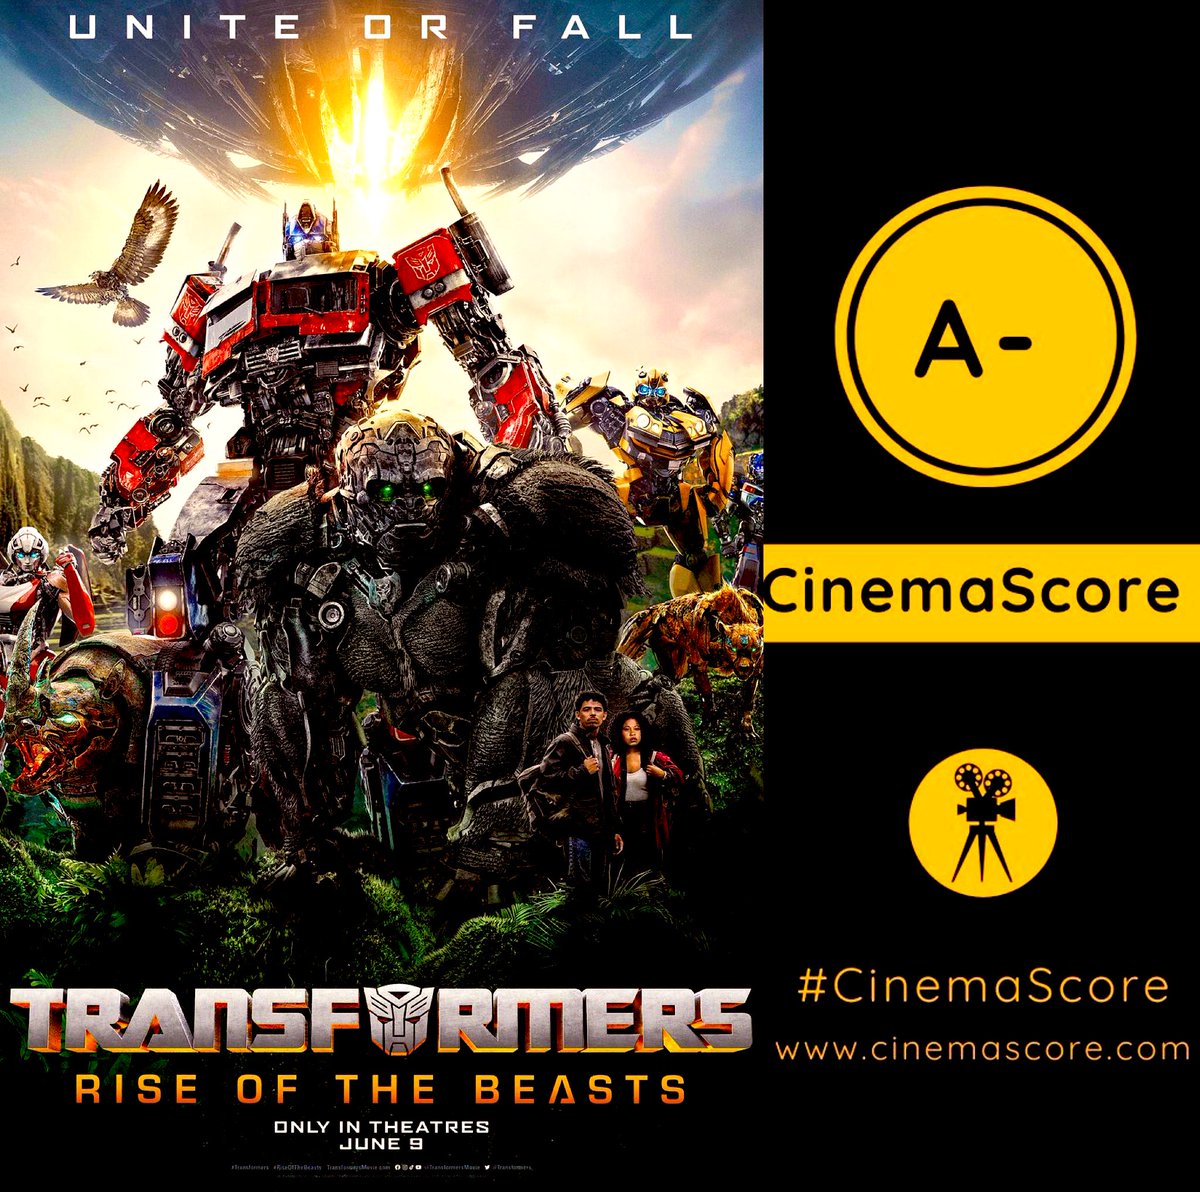 Audiences have spoken!
#TransformersRiseOfTheBeasts may not be franchise’s Prime but it’s close, receiving solid A- #CinemaScore from audiences!

On par with:
#AgeOfExtintion A-
#Bumblebee A-

Under:
#Transformers A
#DarkOfTheMoon A

Over:
#RevengeOfTheFallen B+
#TheLastKnight B+